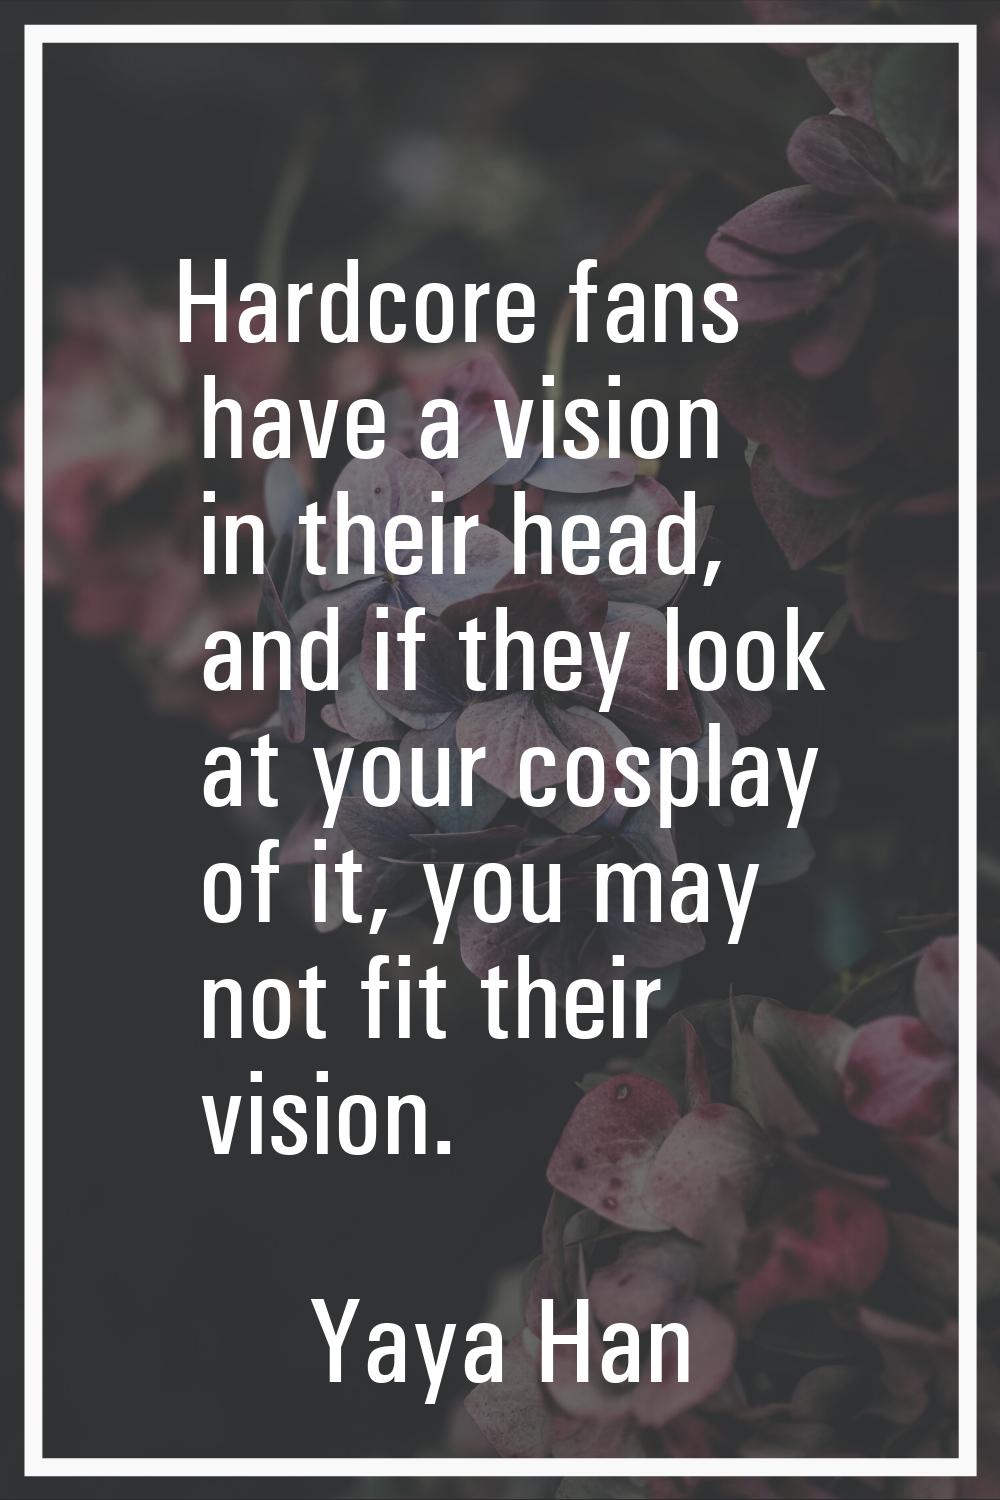 Hardcore fans have a vision in their head, and if they look at your cosplay of it, you may not fit 